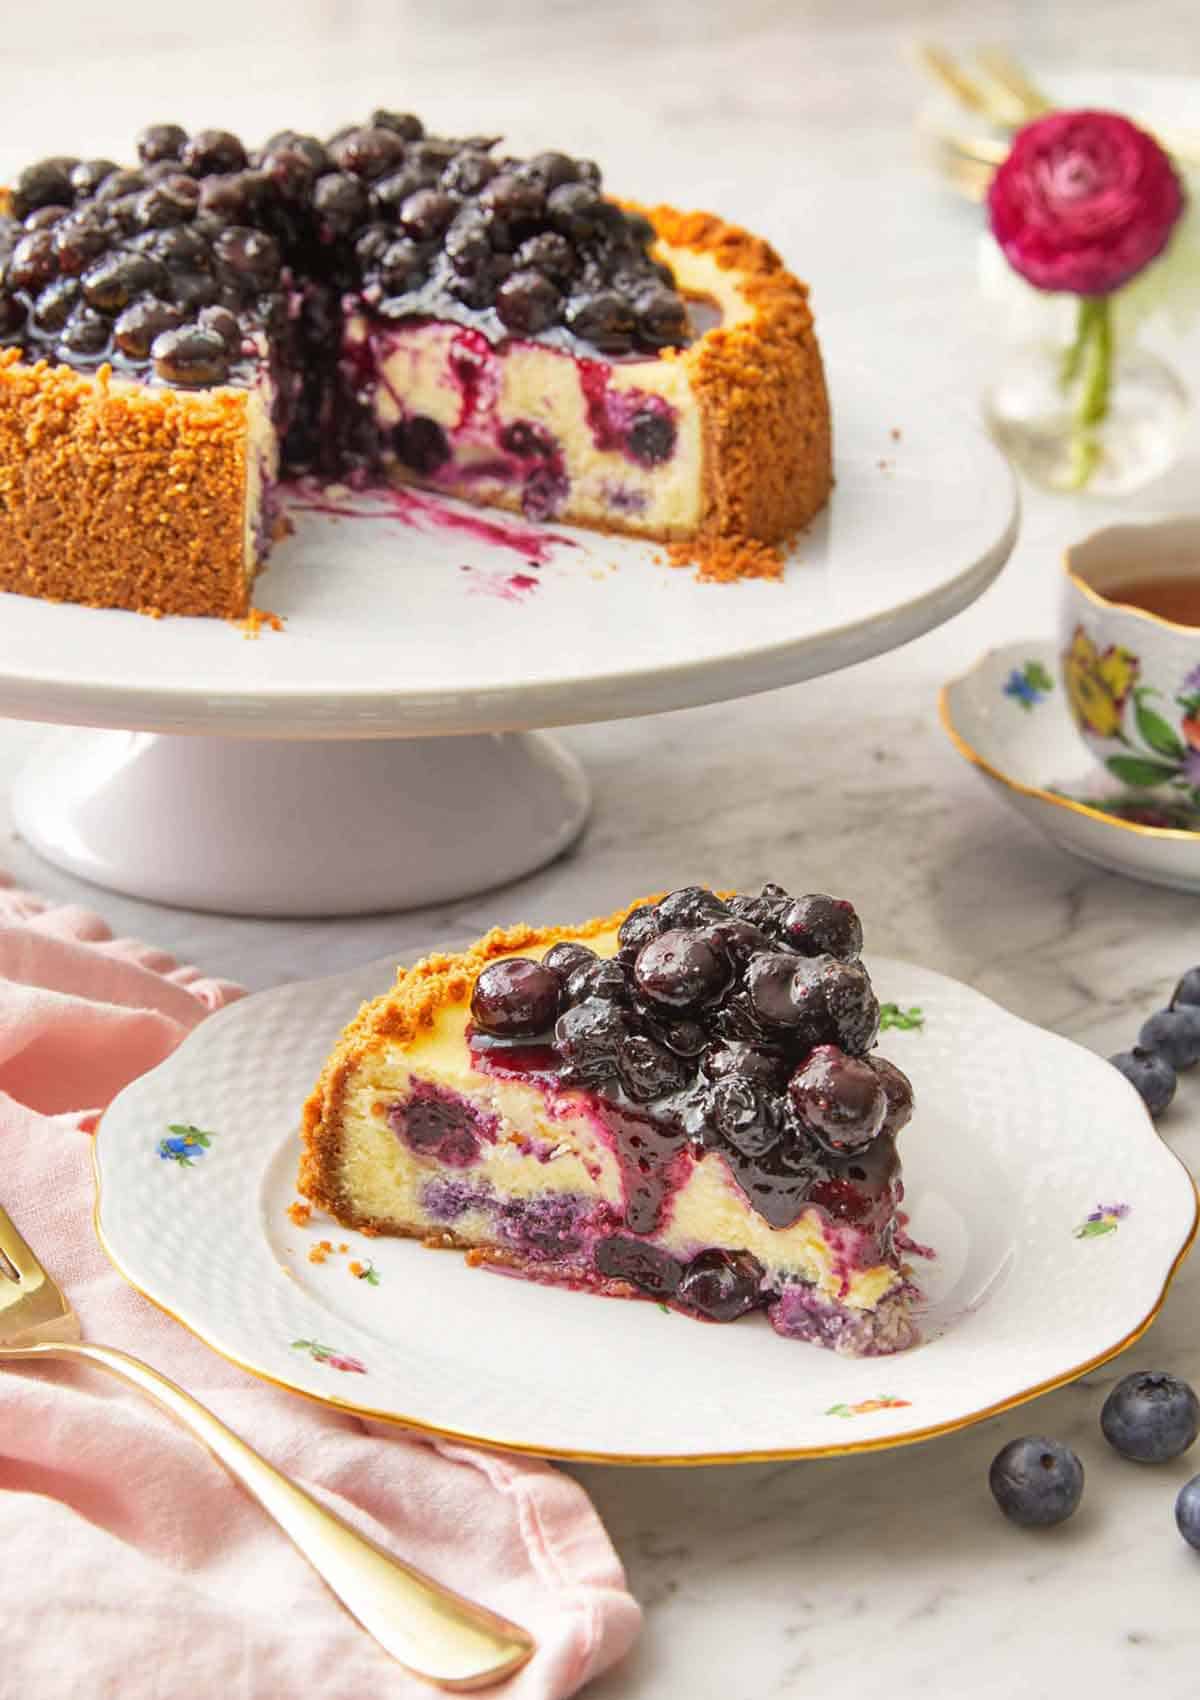 A slice of blueberry cheesecake on a plate in front of a cake stand with the rest of the cheesecake.